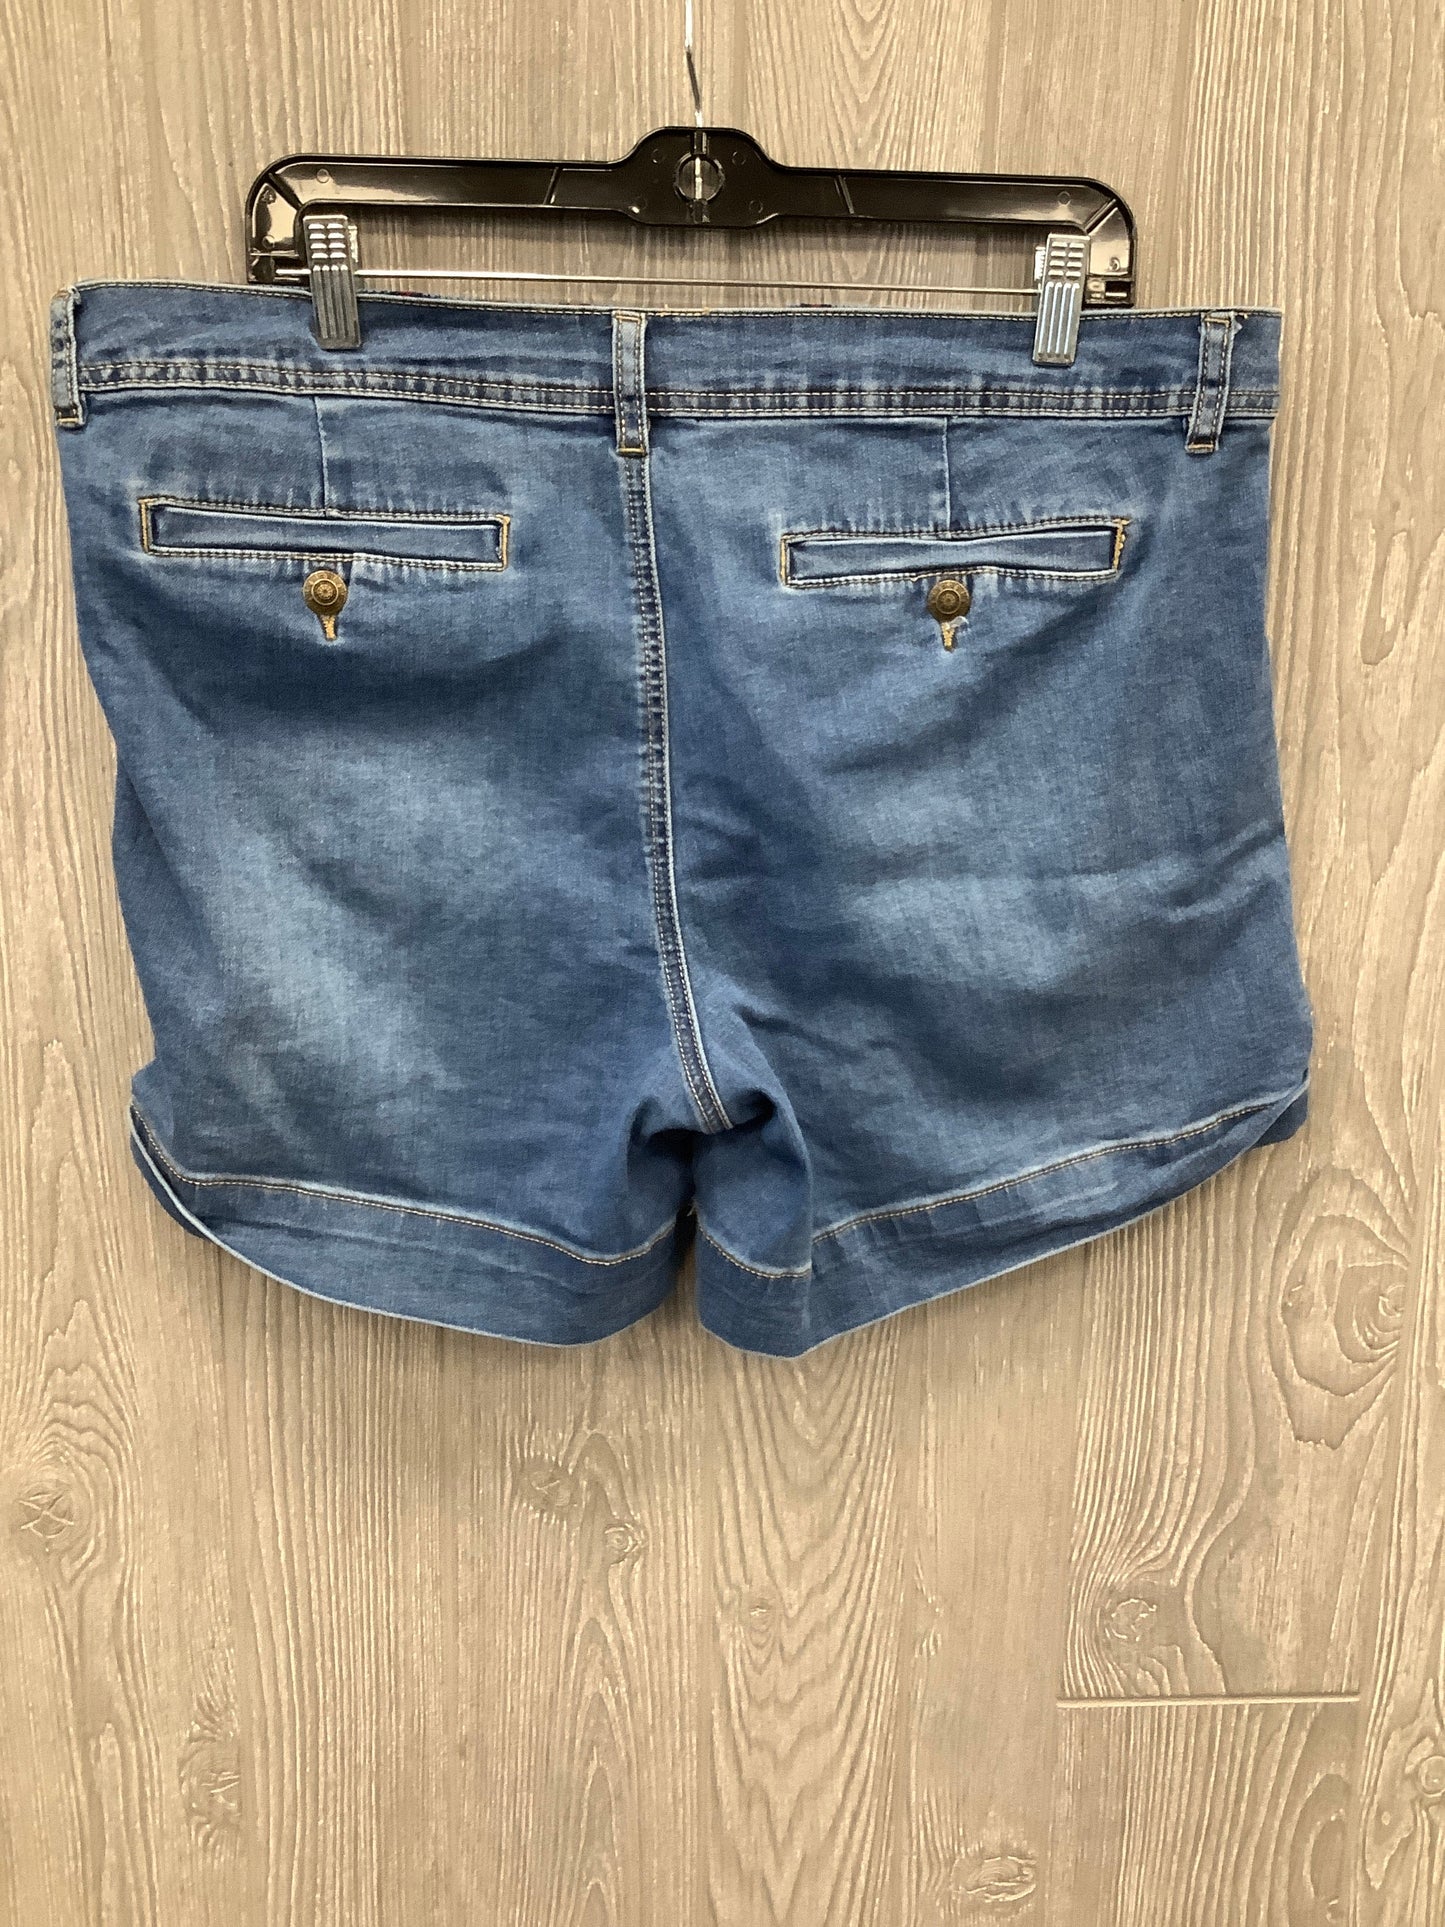 Shorts By One 5 One  Size: 16